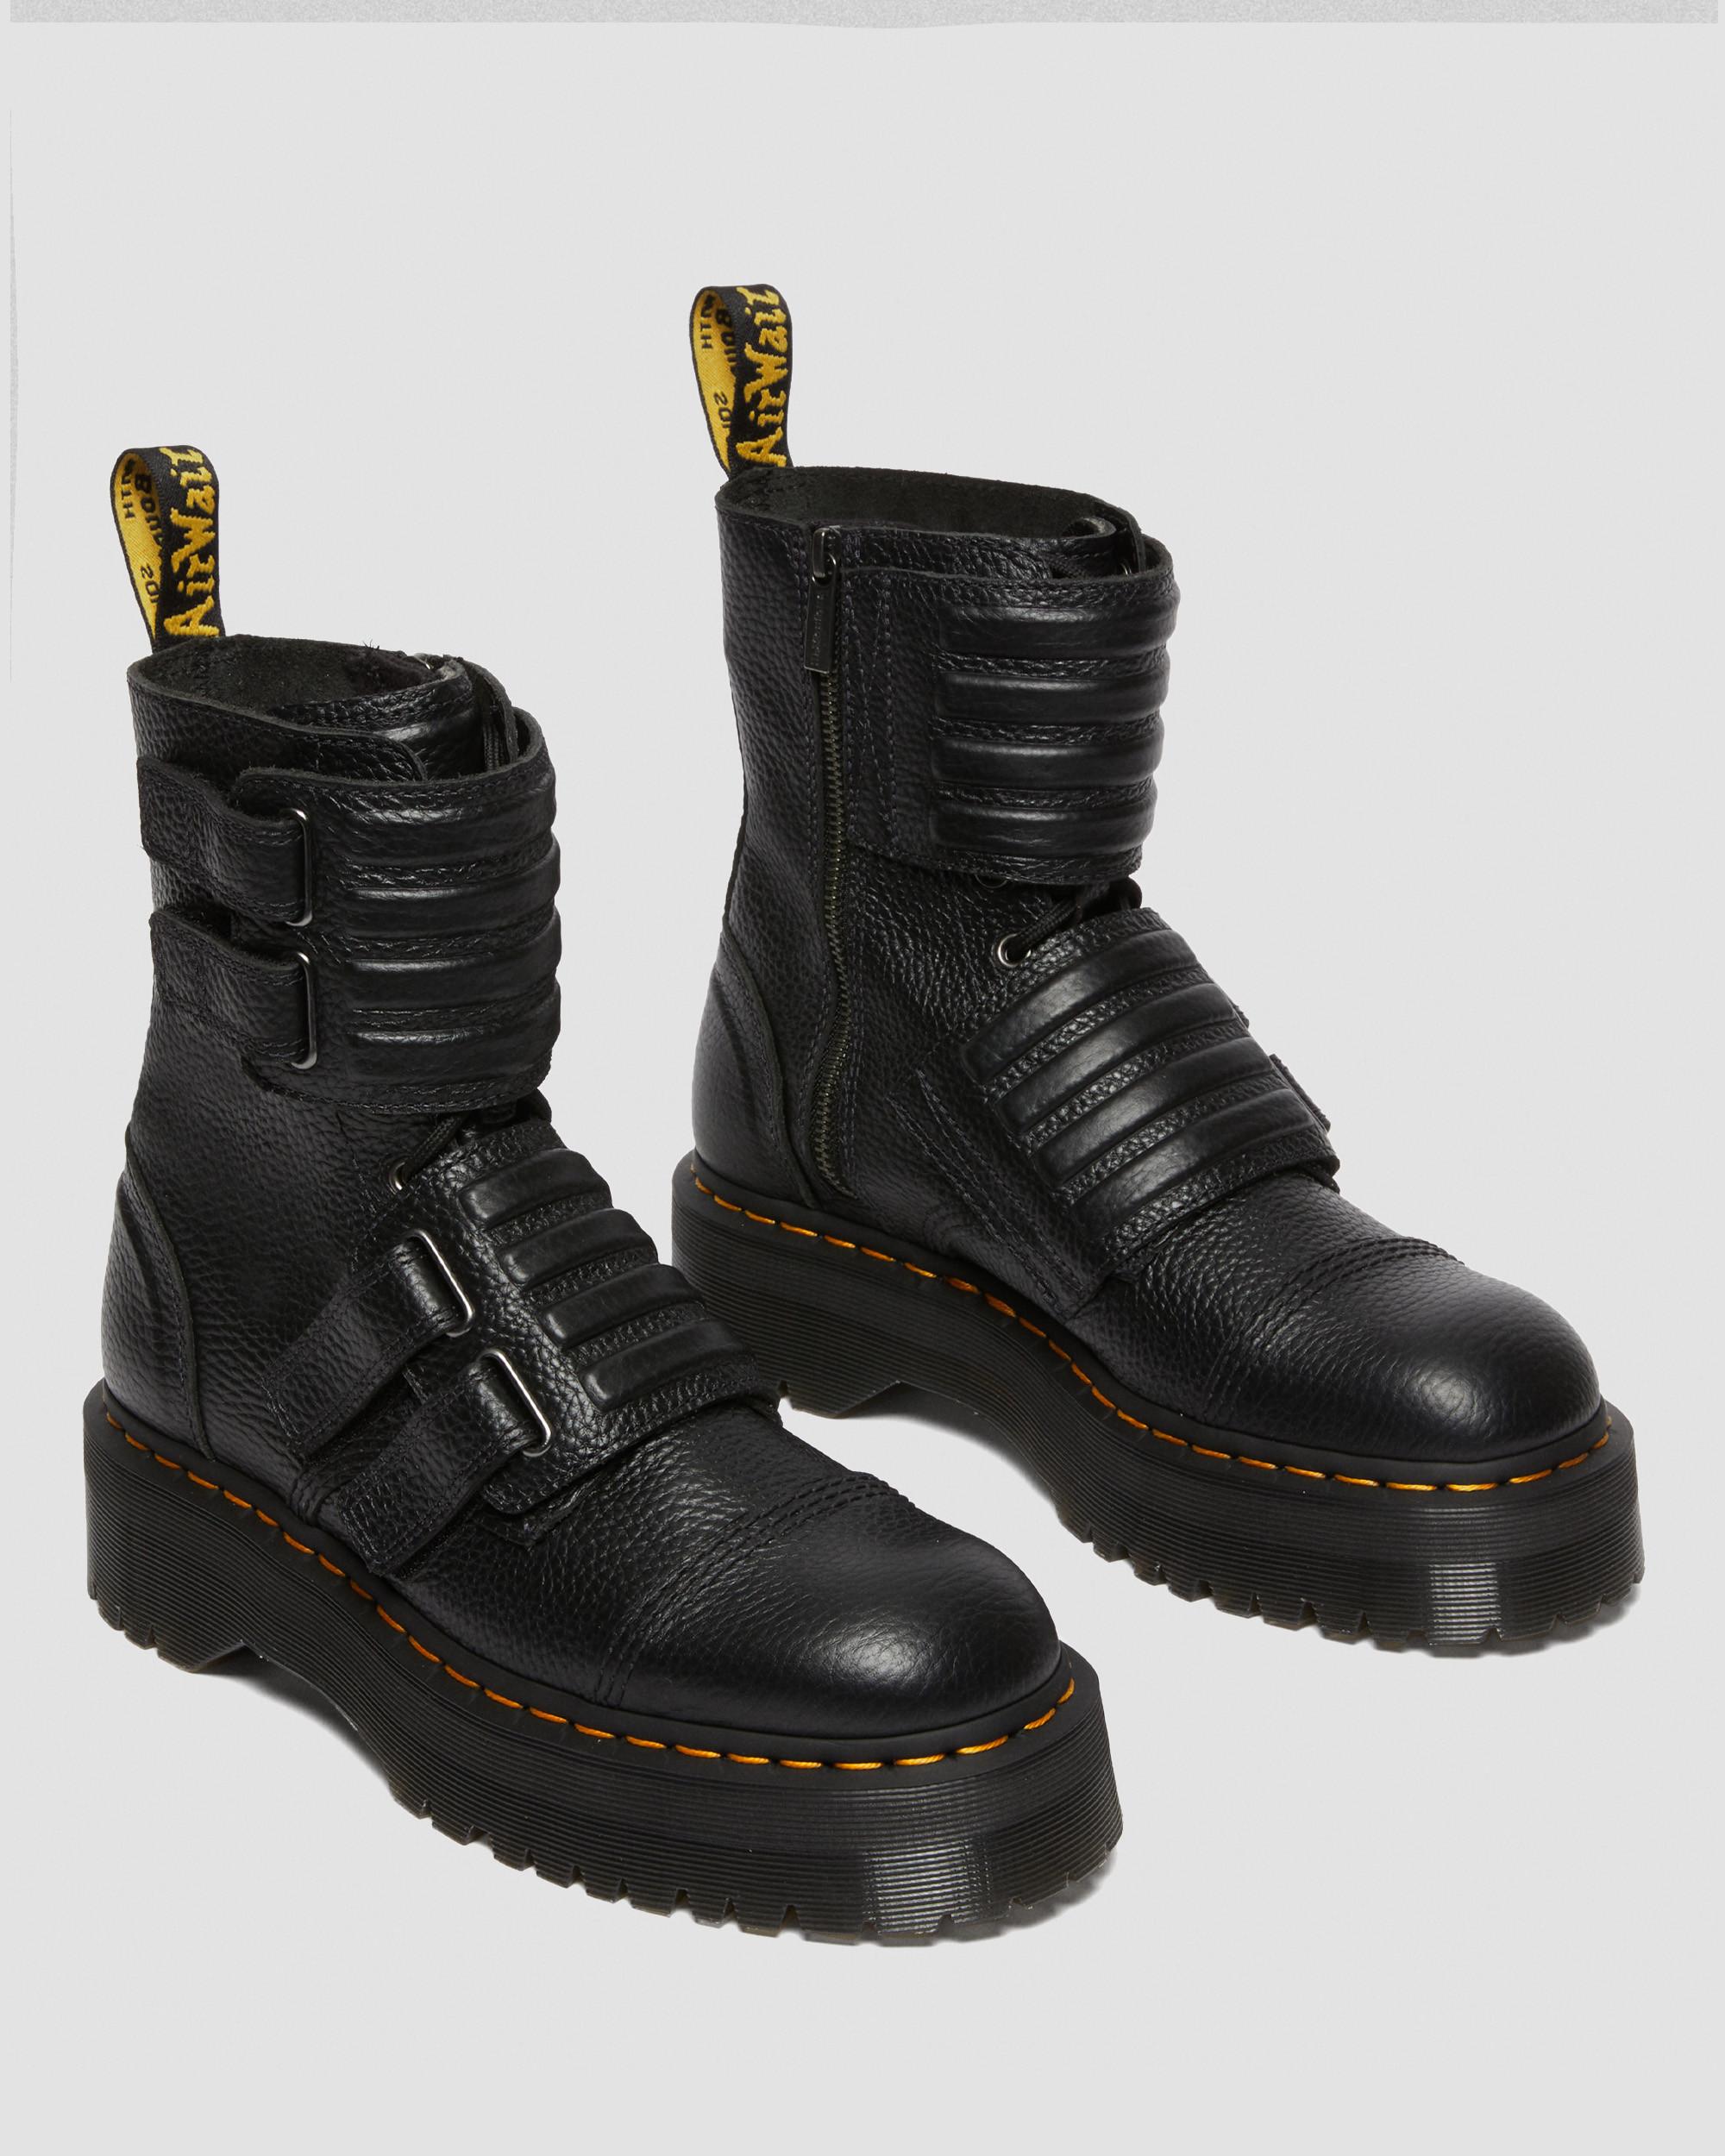 Axxel Leather BootsAxxel Leather Boots Dr. Martens